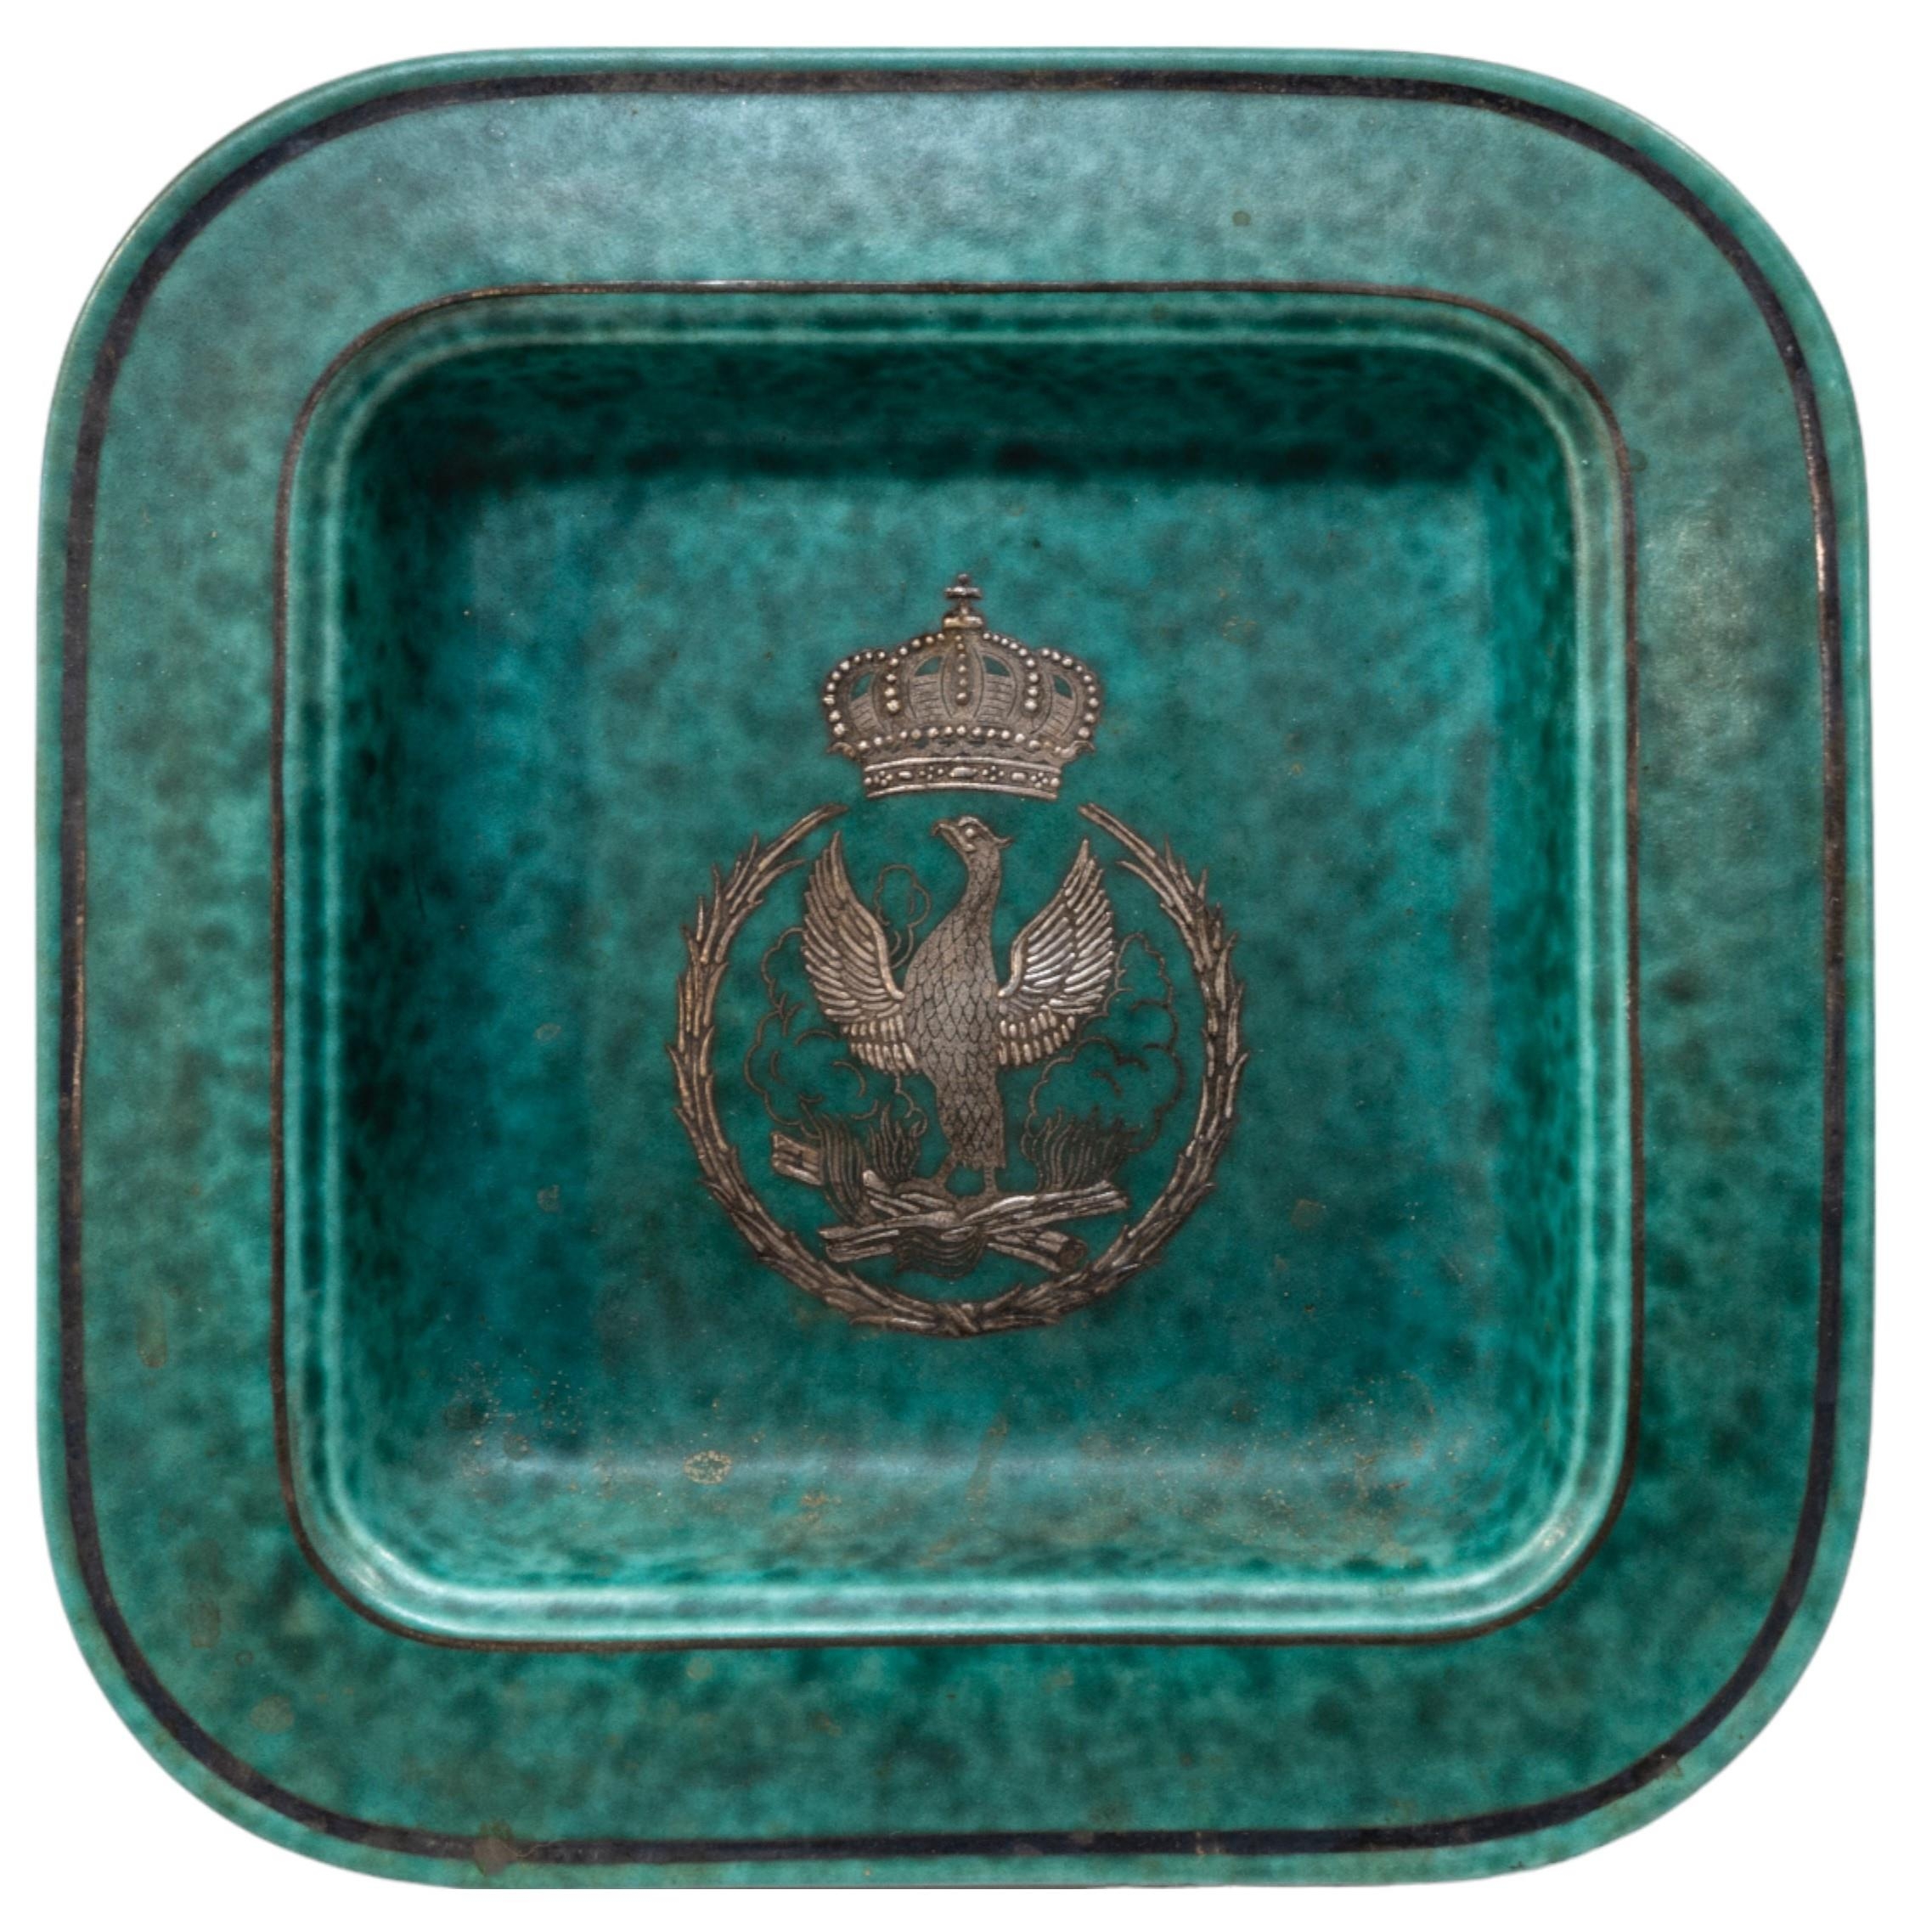 A GUSTAVSBERG 'ARGENTA' SQUARE FORM DISH, CIRCA 1950, green mottled glaze with silver overlaid